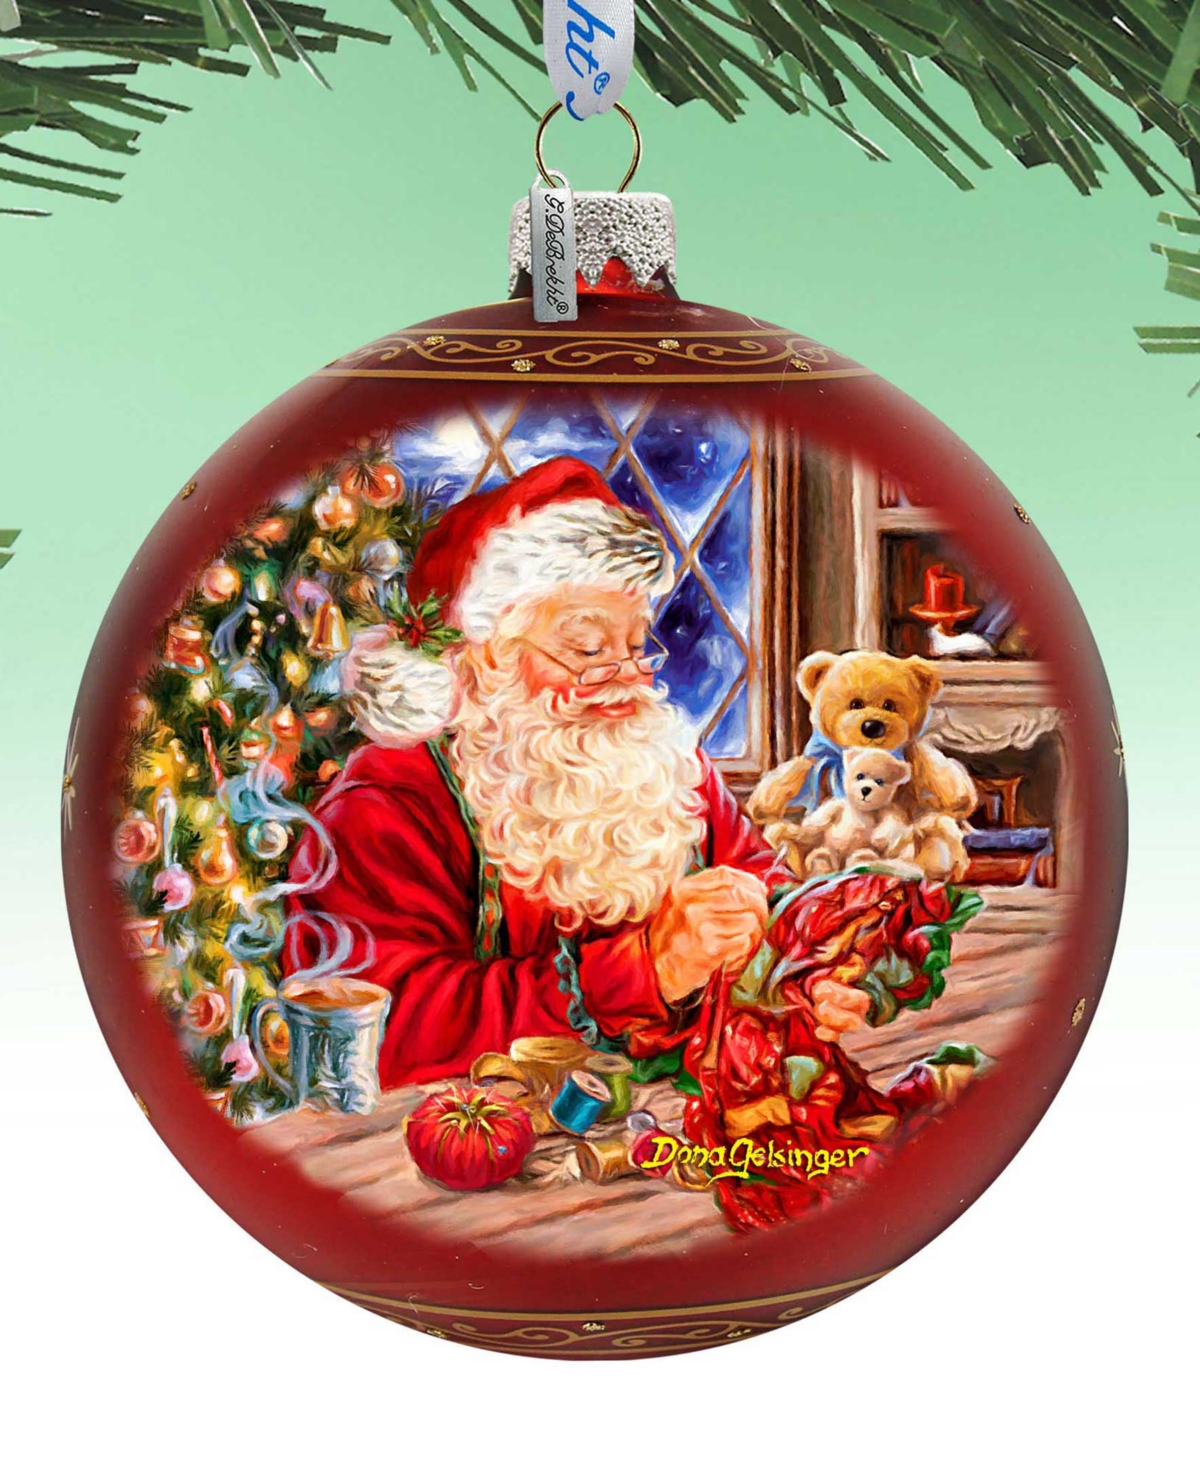 Designocracy Getting Ready For Holidays Santa Lg Glass Holiday Ornaments D. Gelsinger In Multi Color